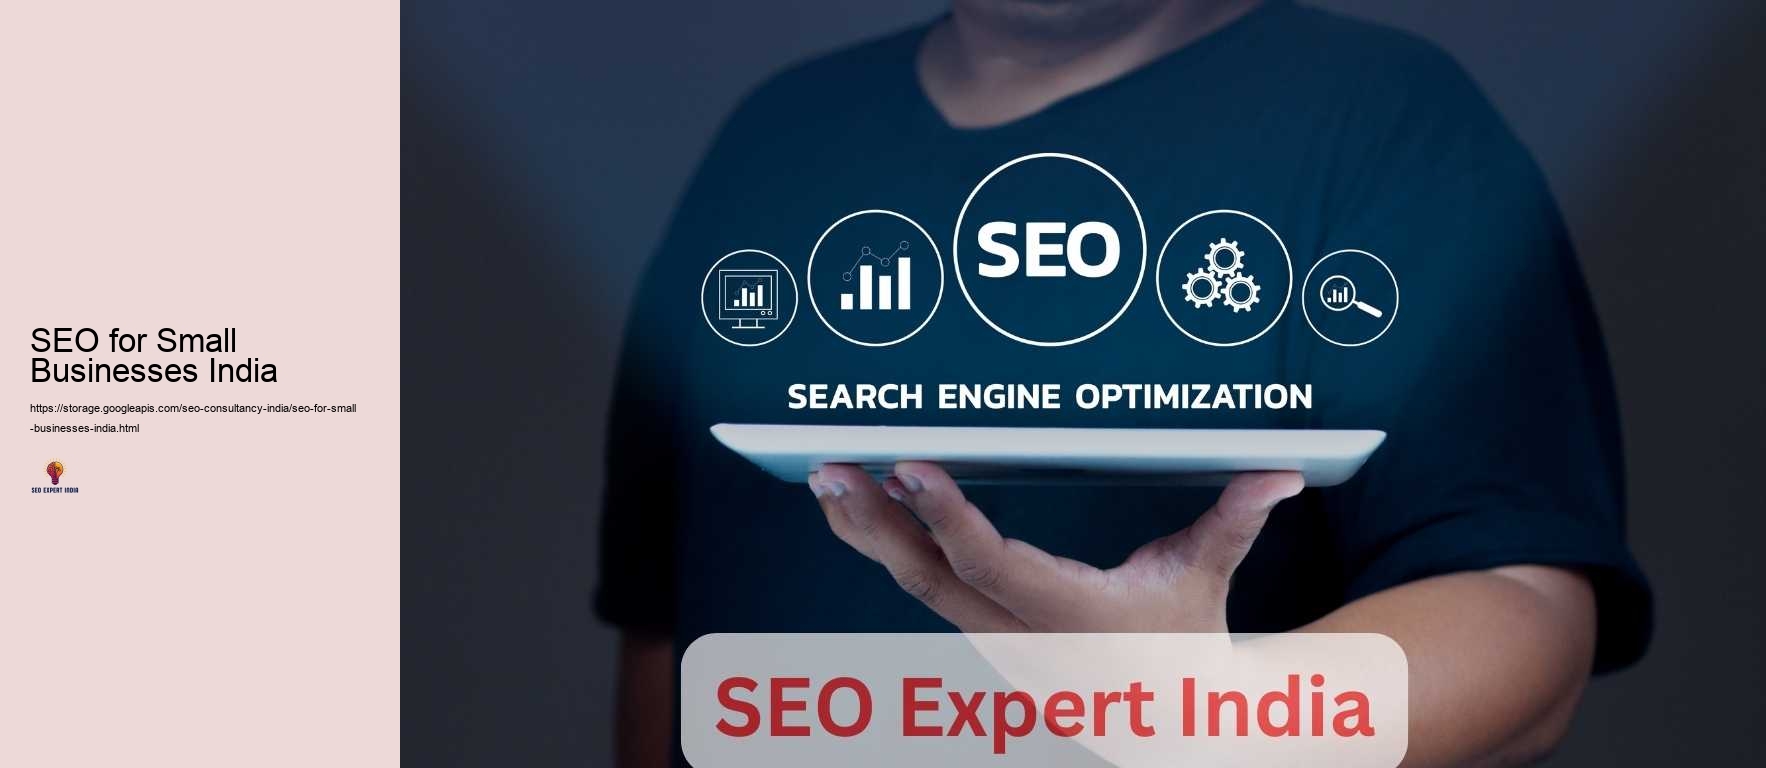 SEO for Small Businesses India